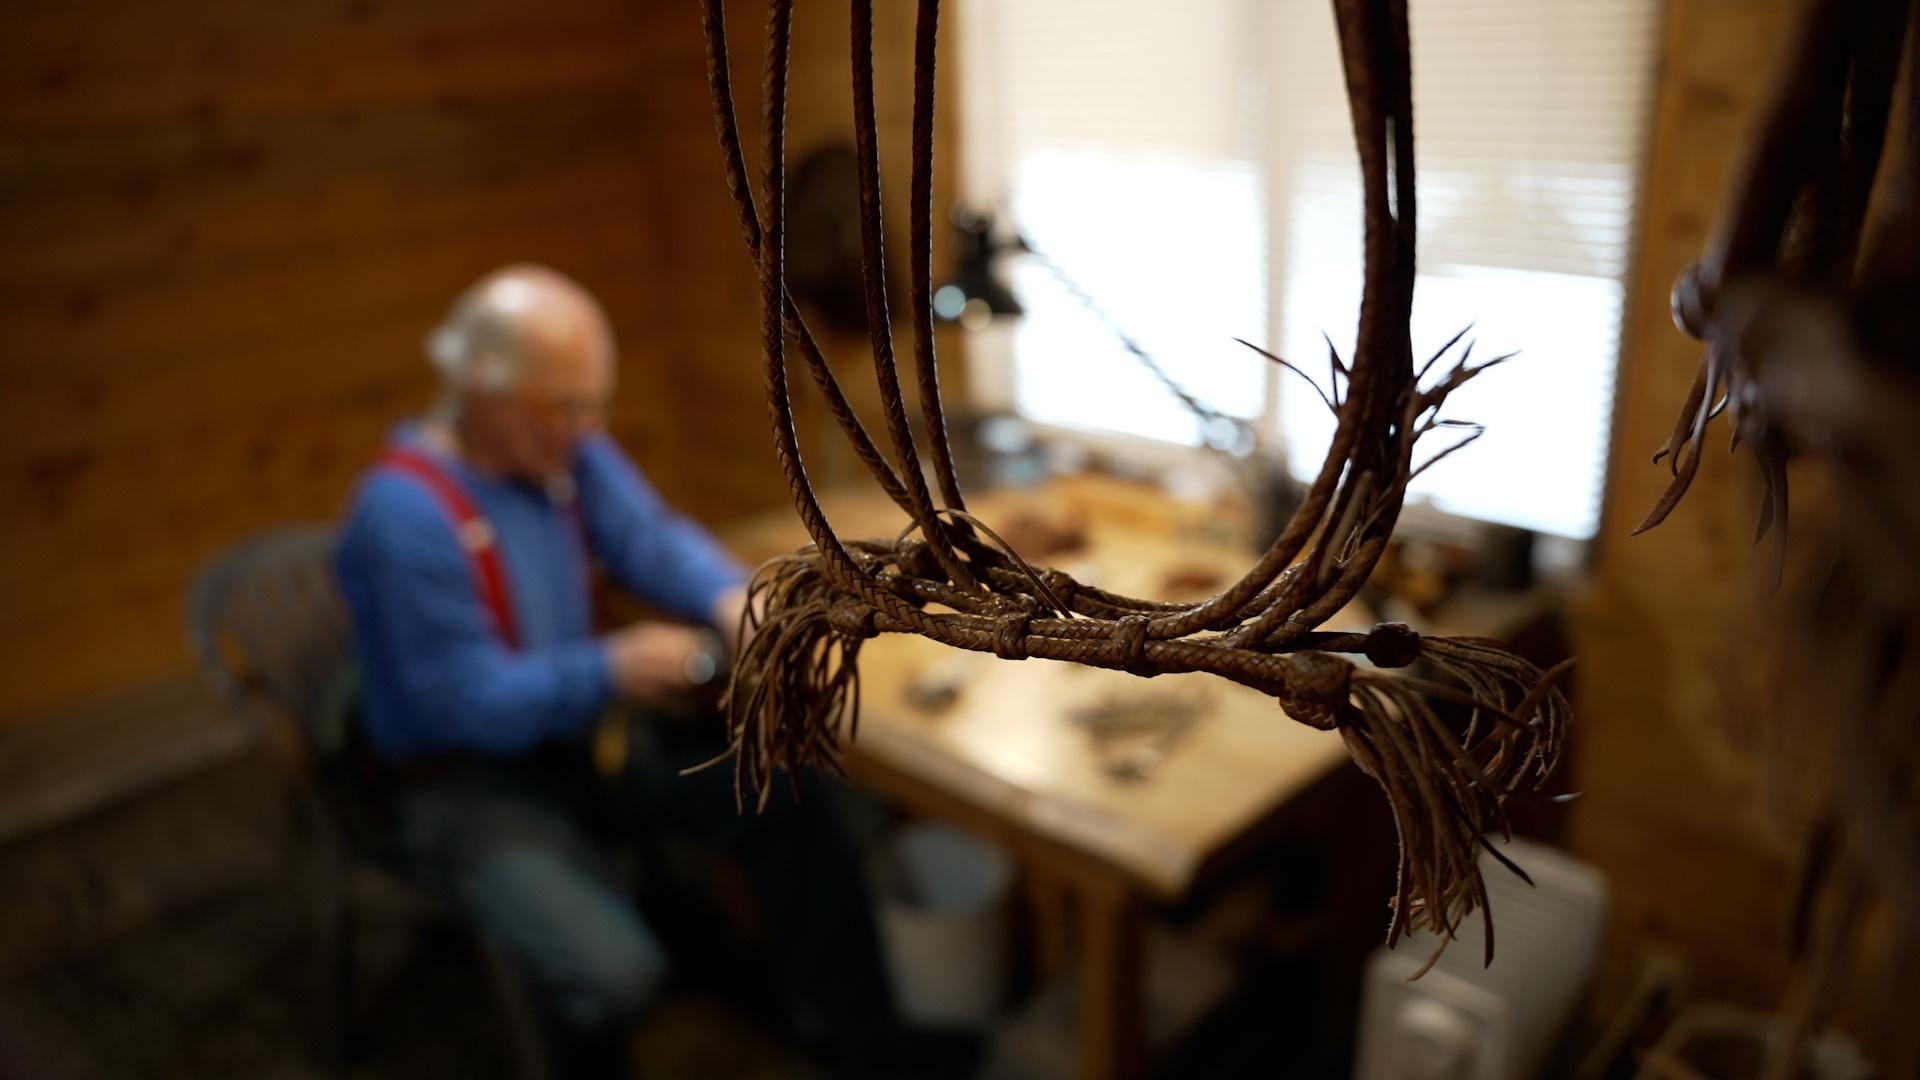 Mike “Hooey” Storch, a leather braider in Donnelly, Idaho, at work.